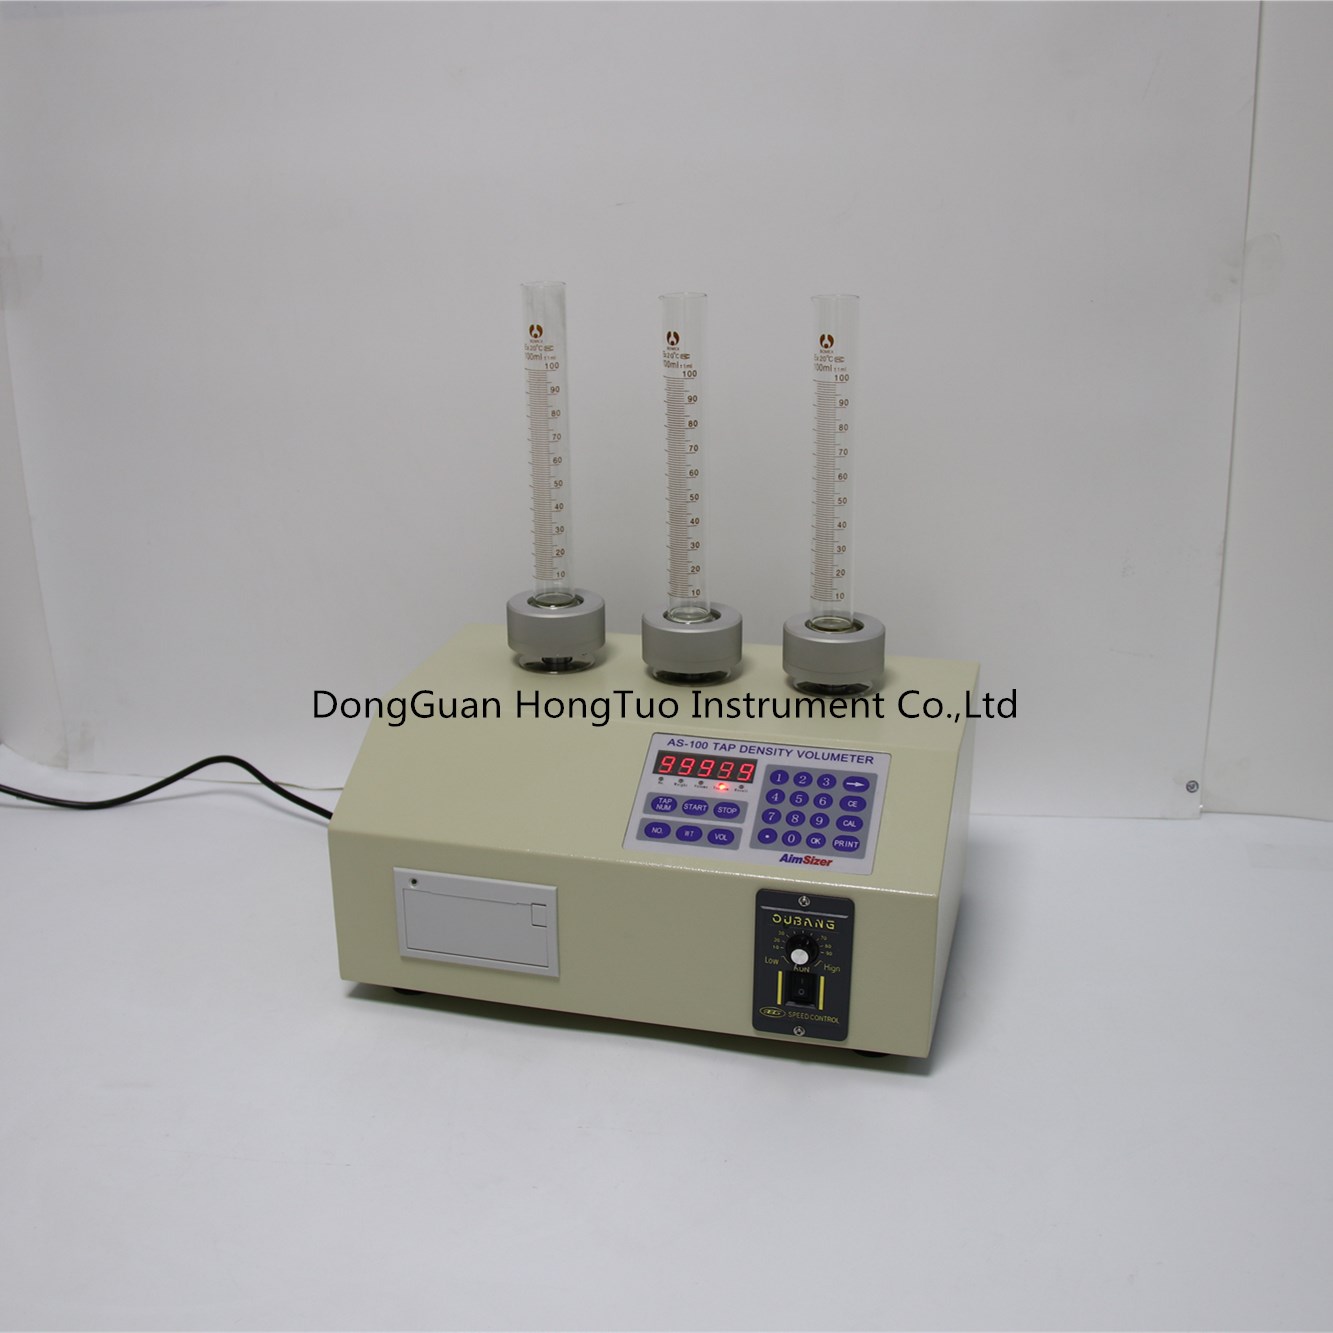 DY-100C Powder Tap Density Tester For Chmical Powder Materials Quality Test 